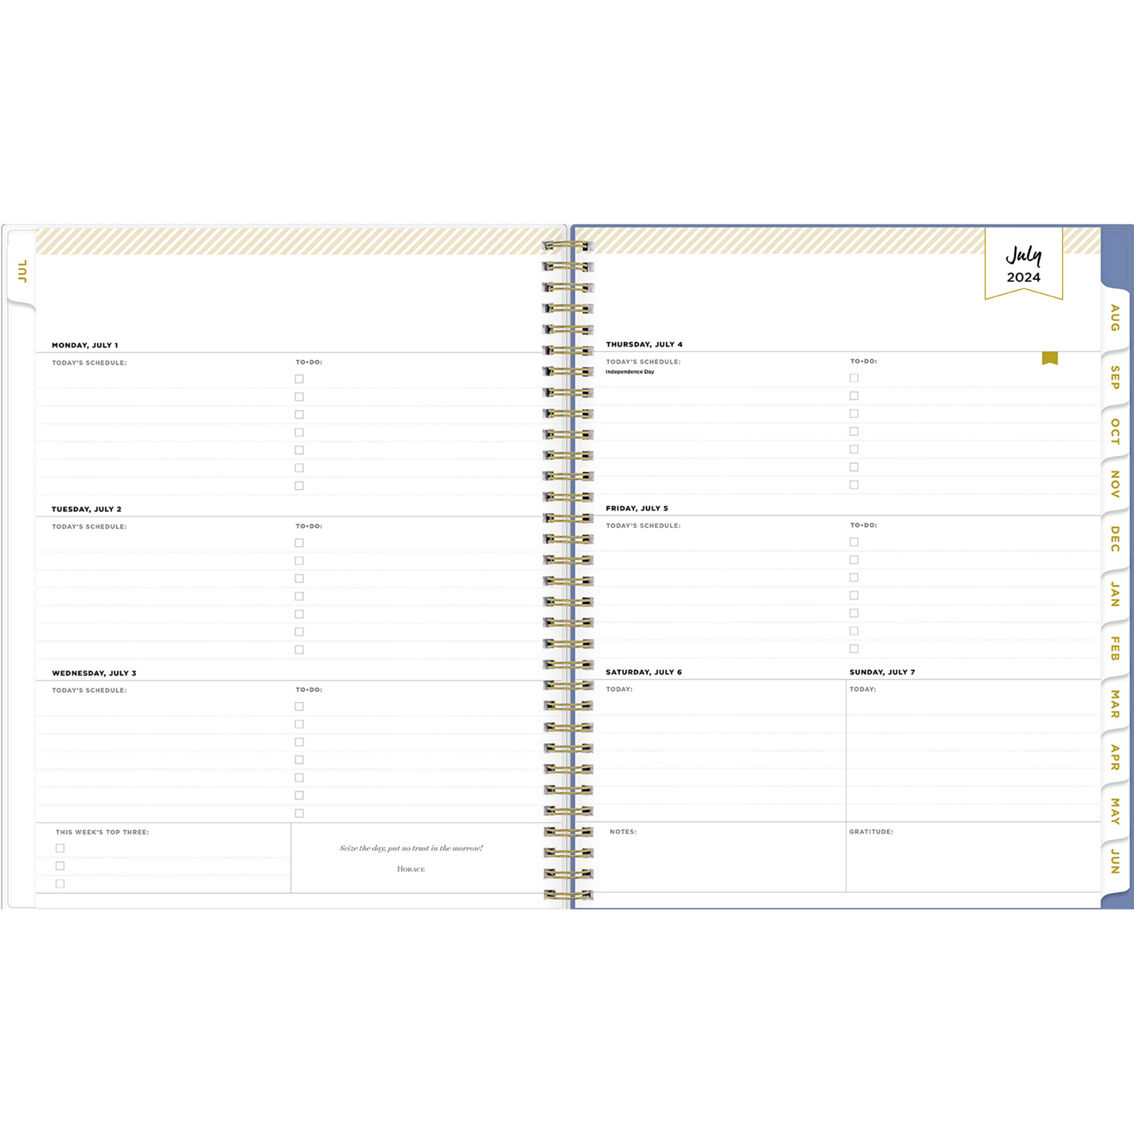 Bluesky 8.5 x 11 in. Weekly/Monthly Academic Planning Calendar - Image 2 of 3